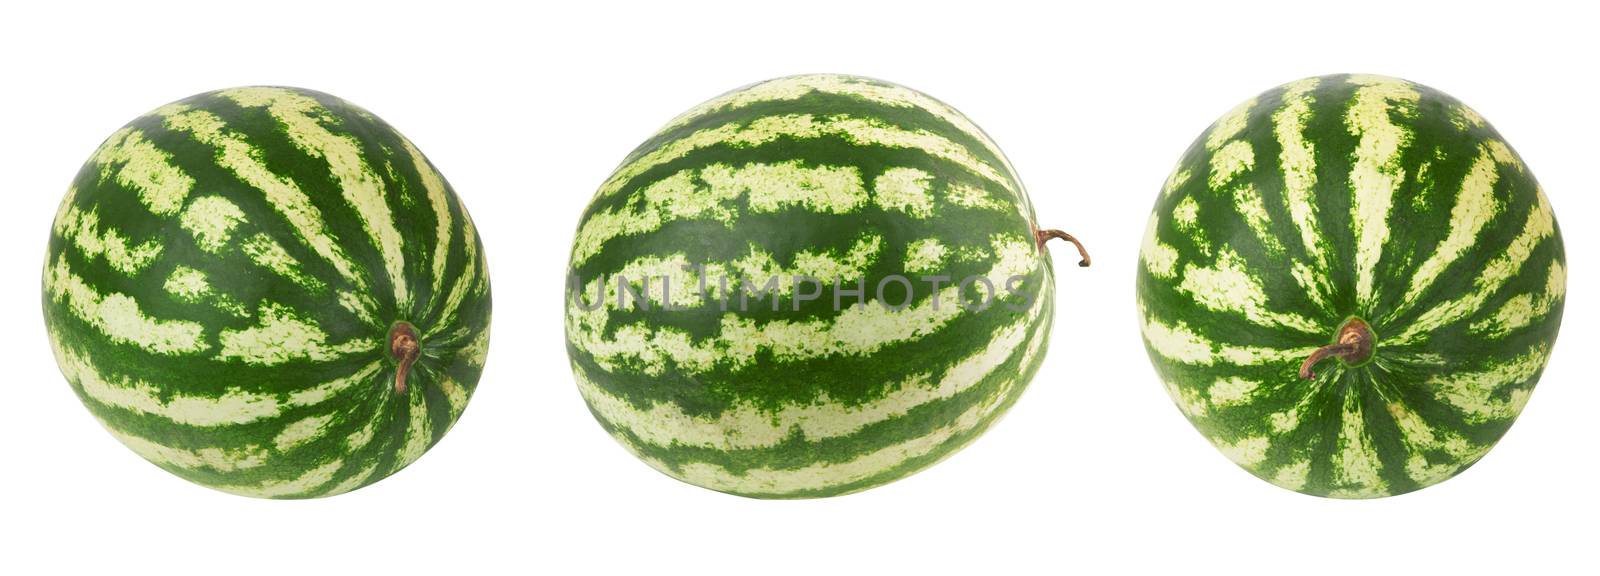 Watermelon on white  by pioneer111